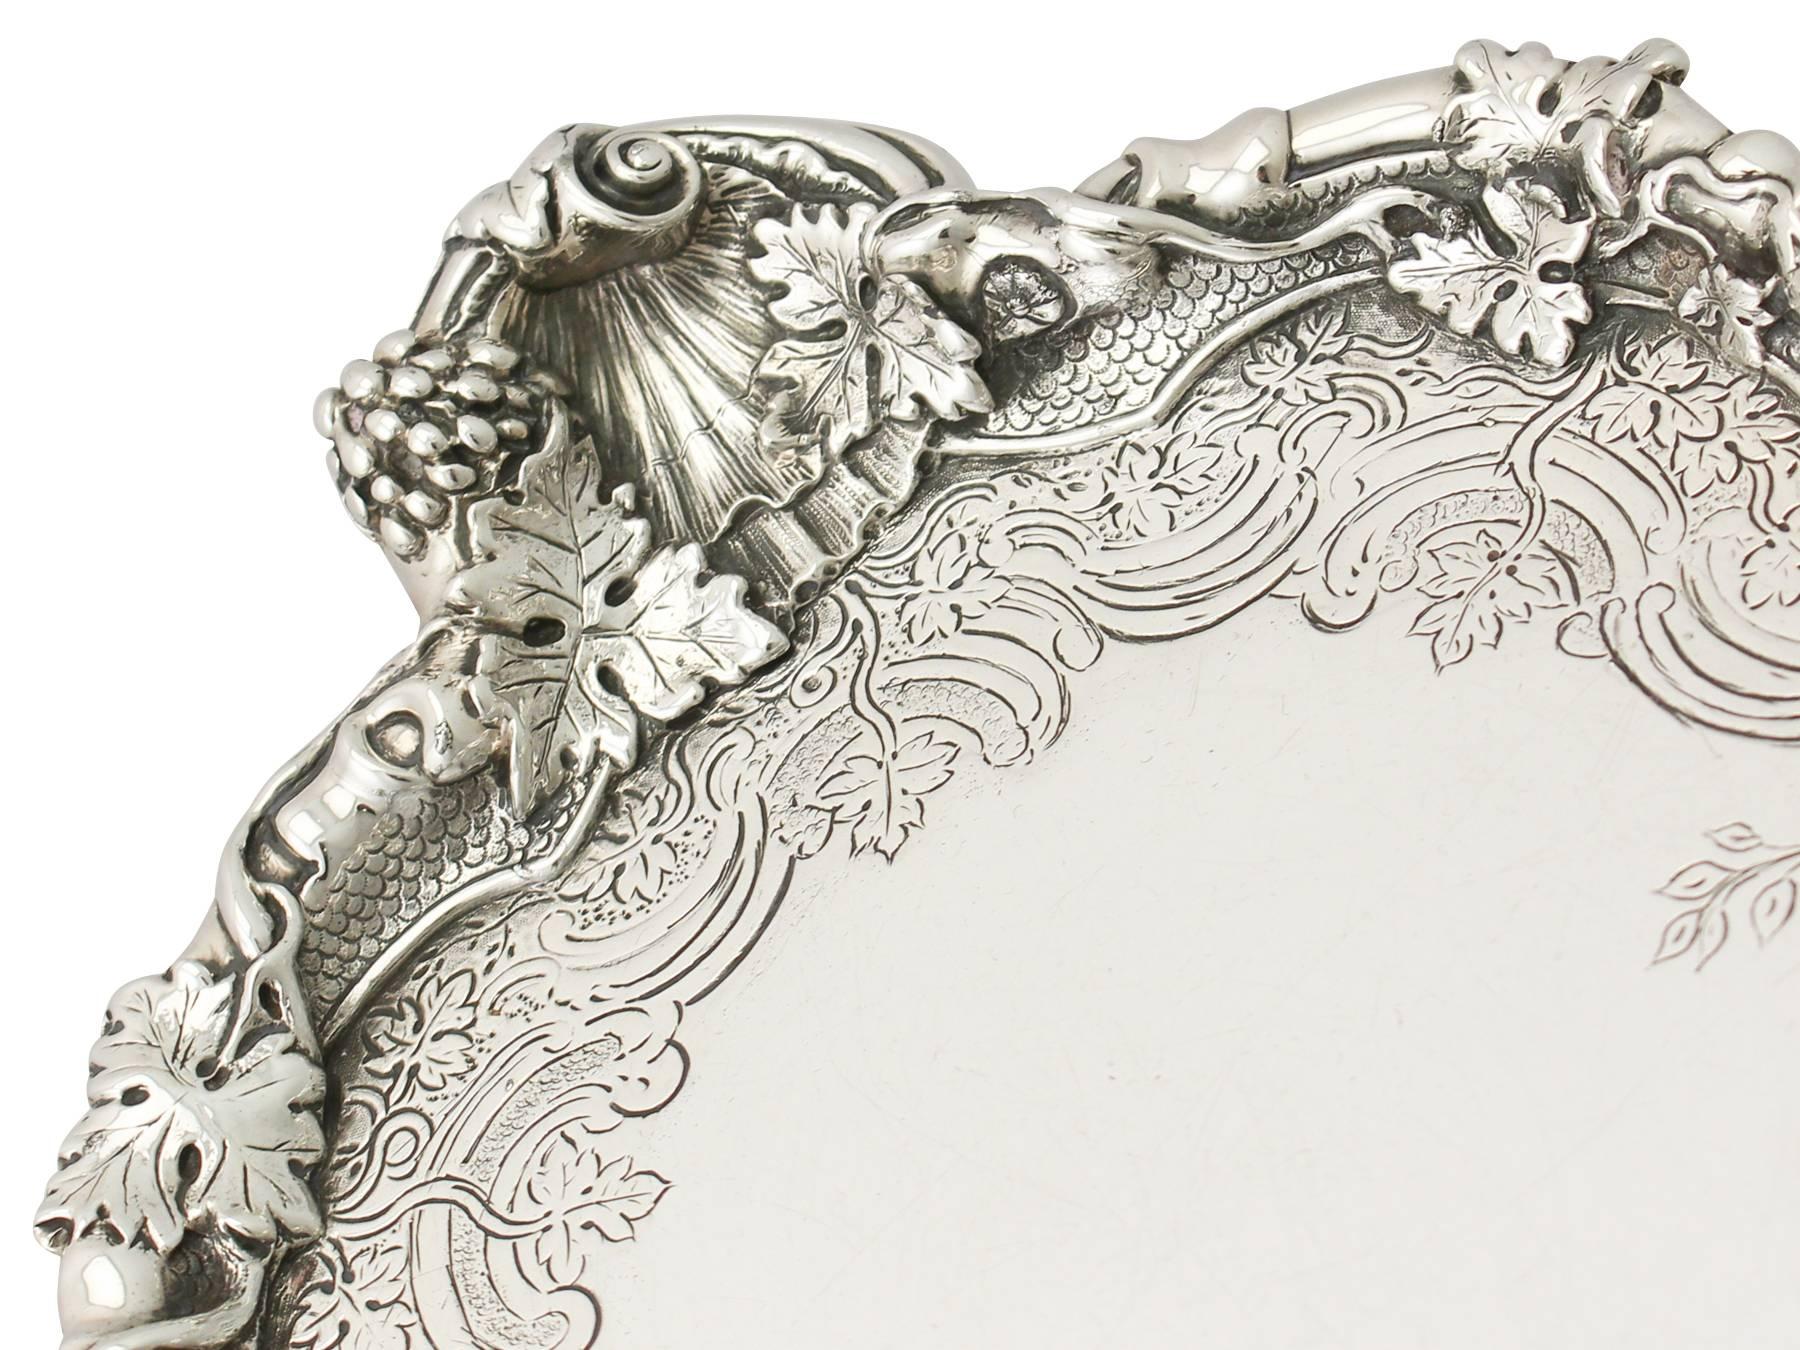 English Antique George II Rococo Style Sterling Silver Salvers by Paul de Lamerie